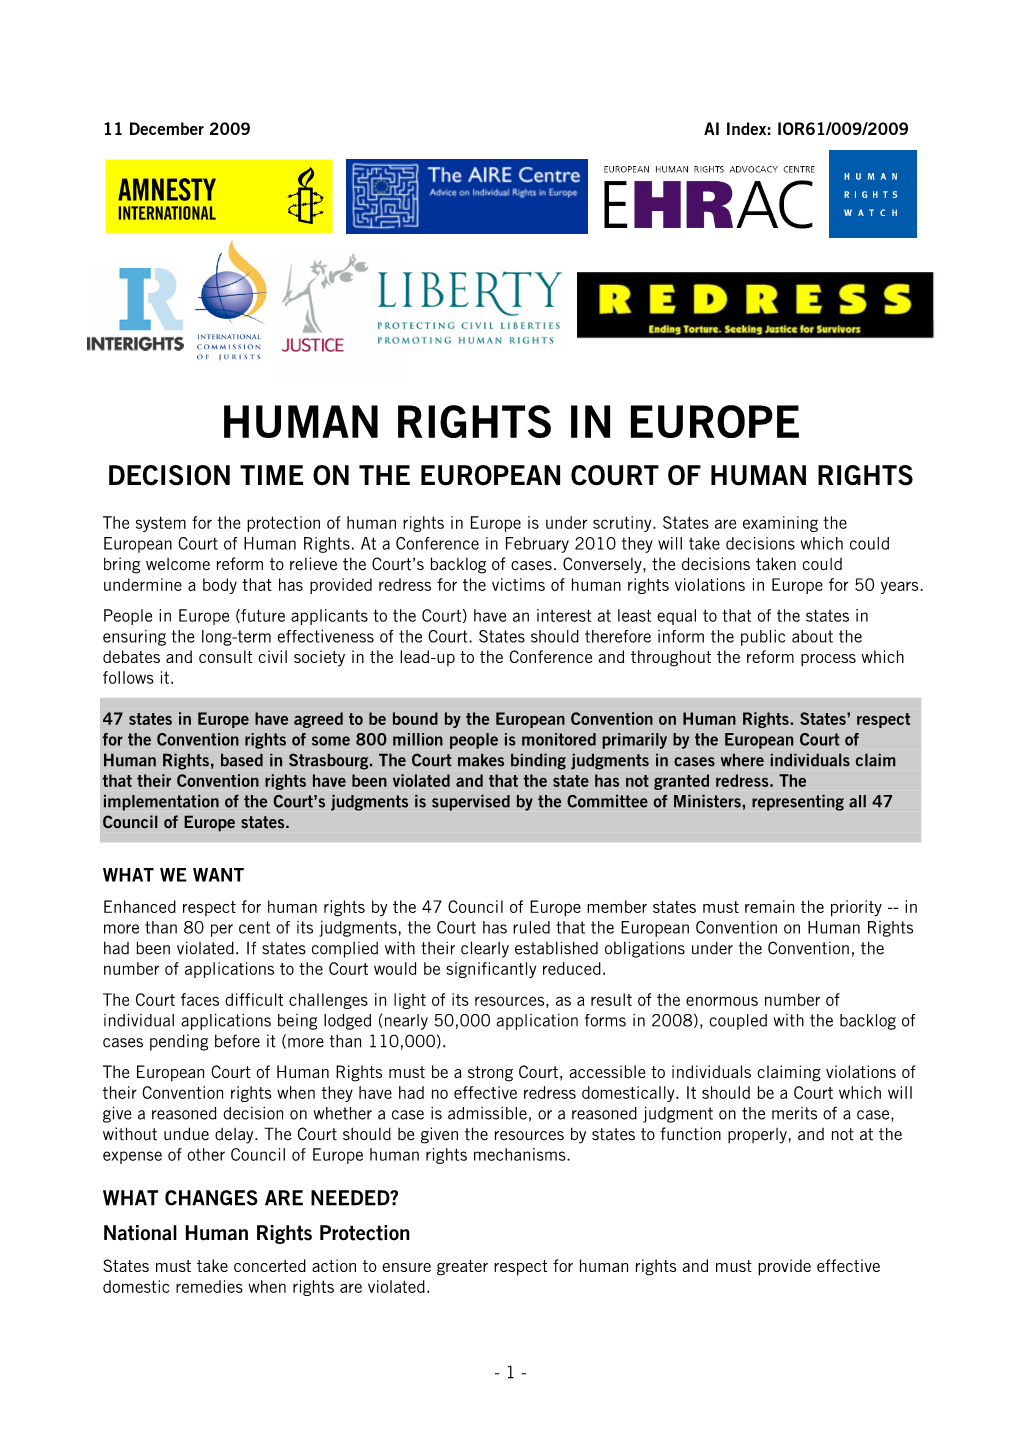 Decision Time on the European Court of Human Rights